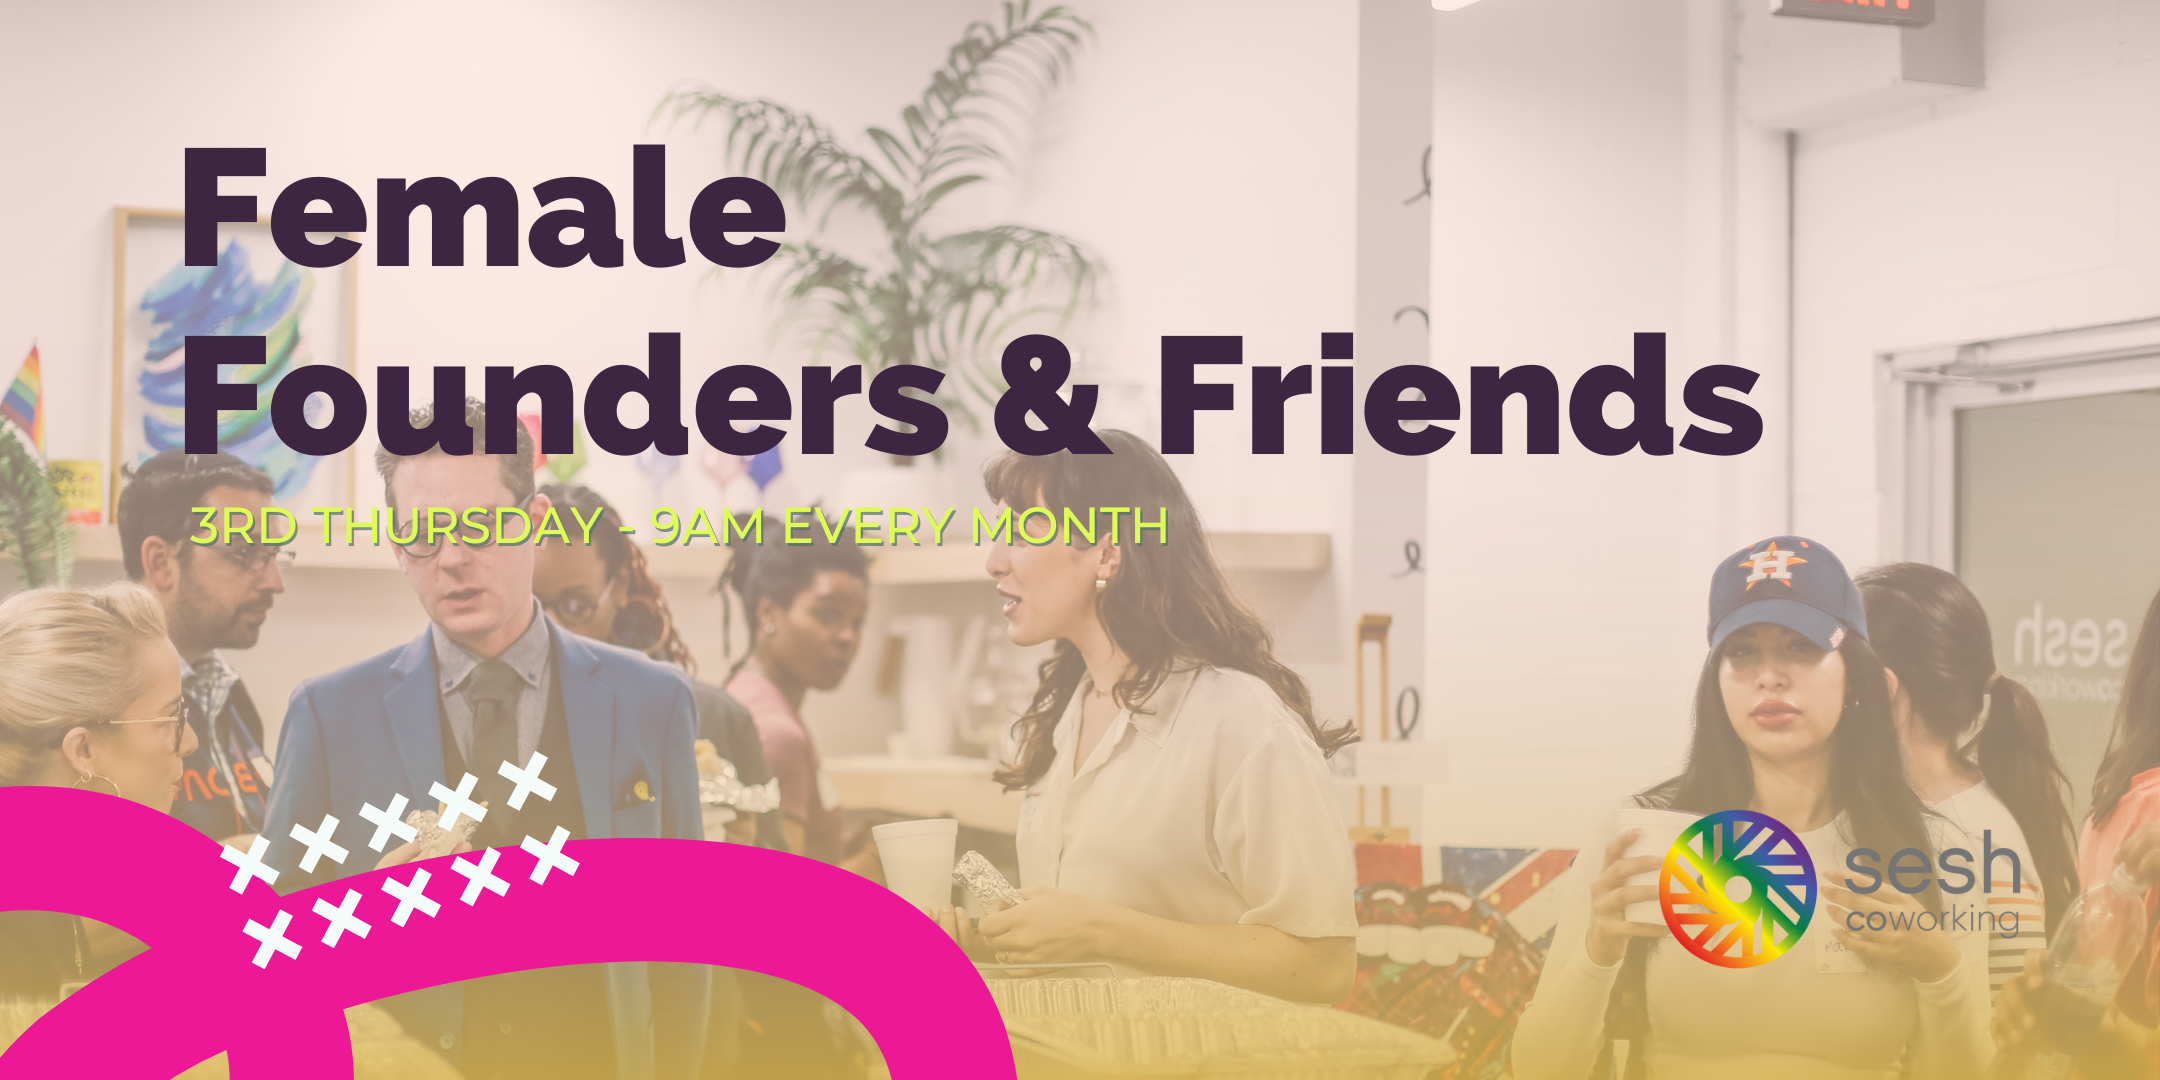 female founders and friends at Sesh Coworking, every 3rd Thursday of the month at 9am.